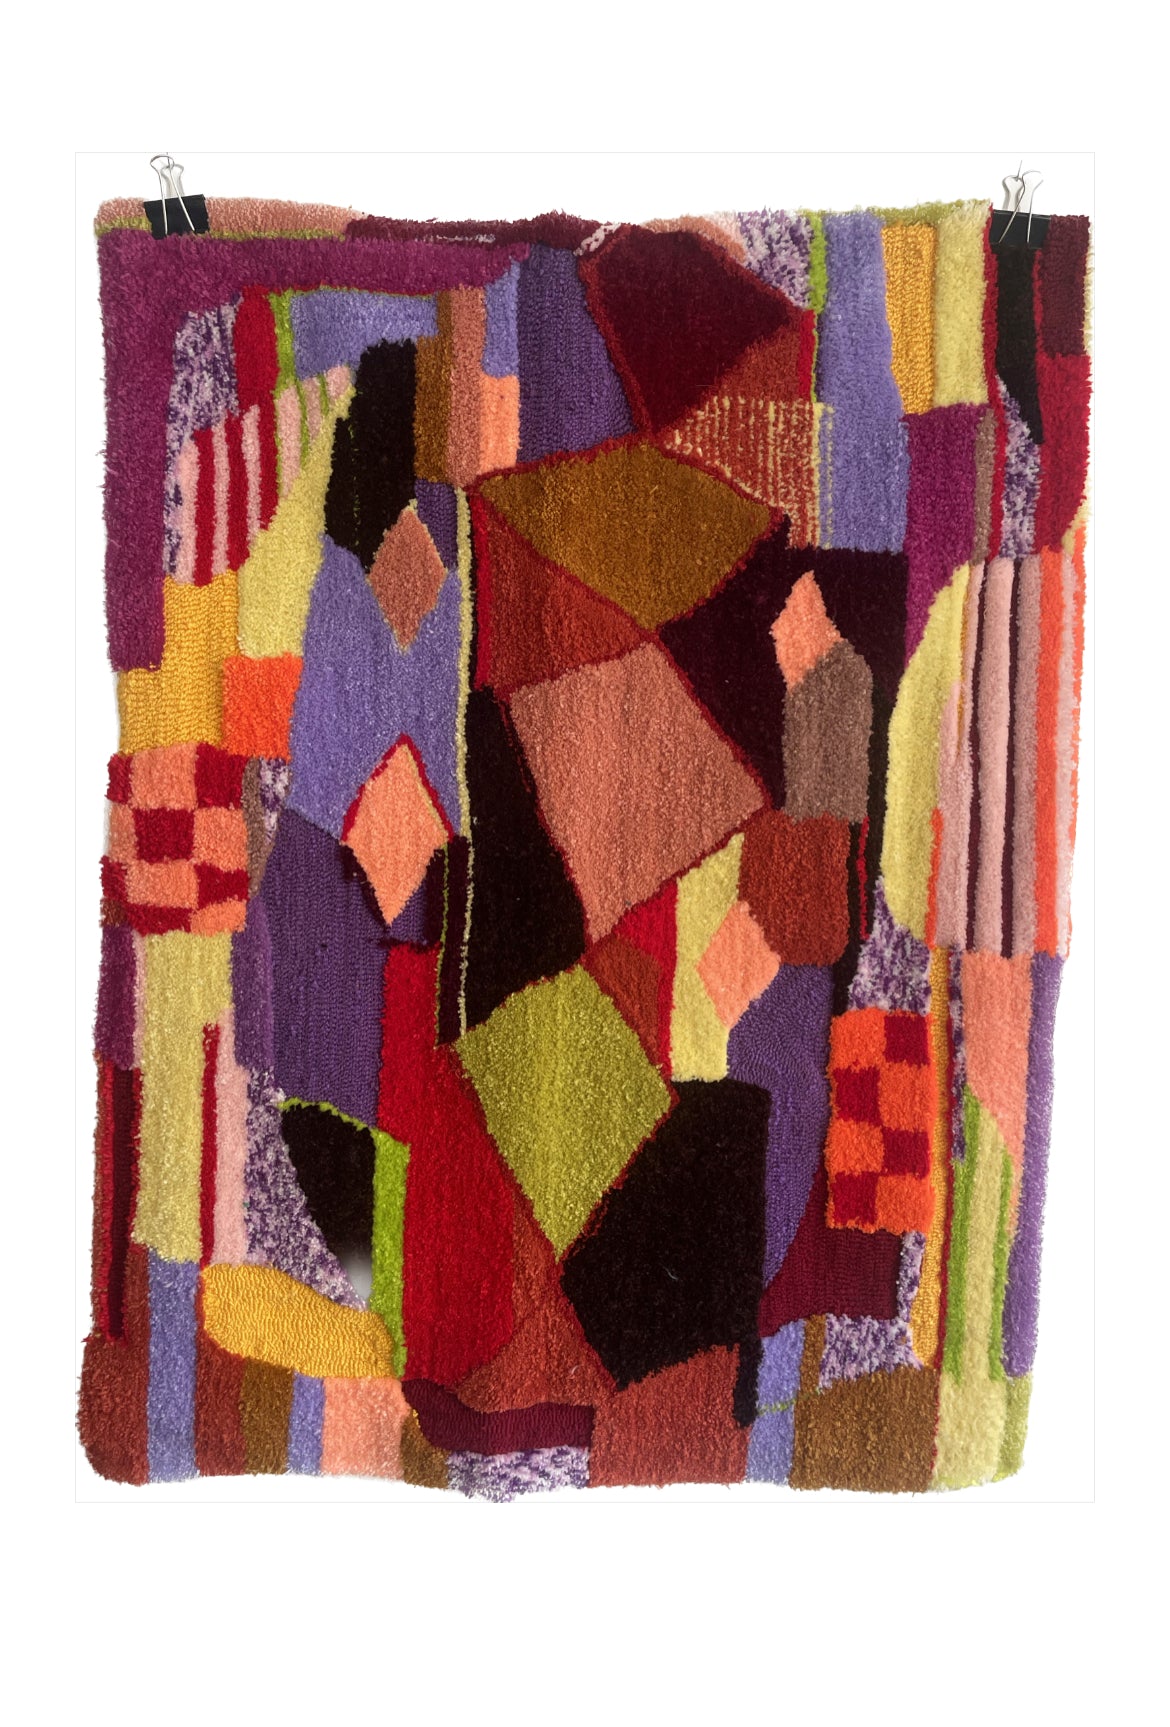 Collection 6 - No.1 - Tufted Wall-hanging or Rug